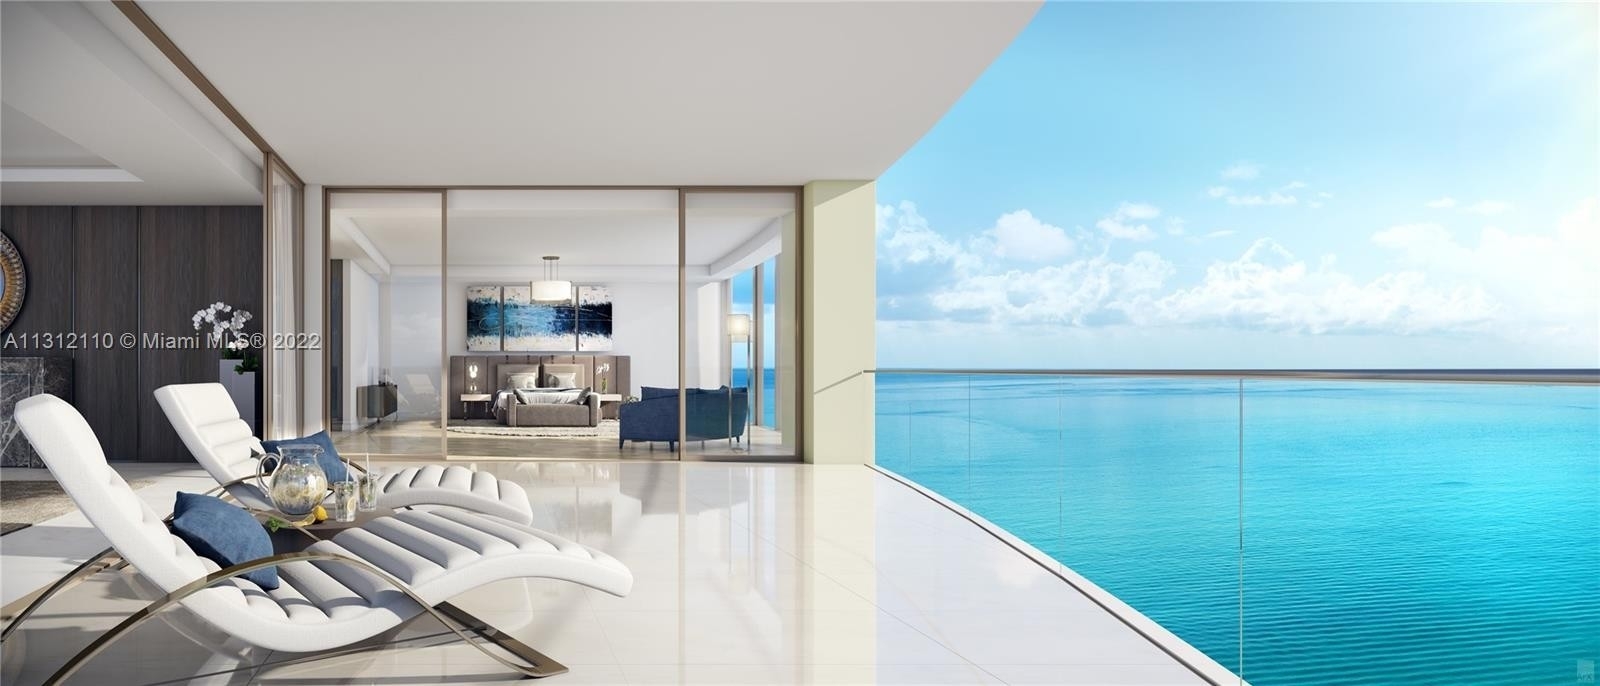 Condominium for Sale at 17975 Collins Ave , 2301 North Biscayne Beach, Sunny Isles Beach, FL 33160